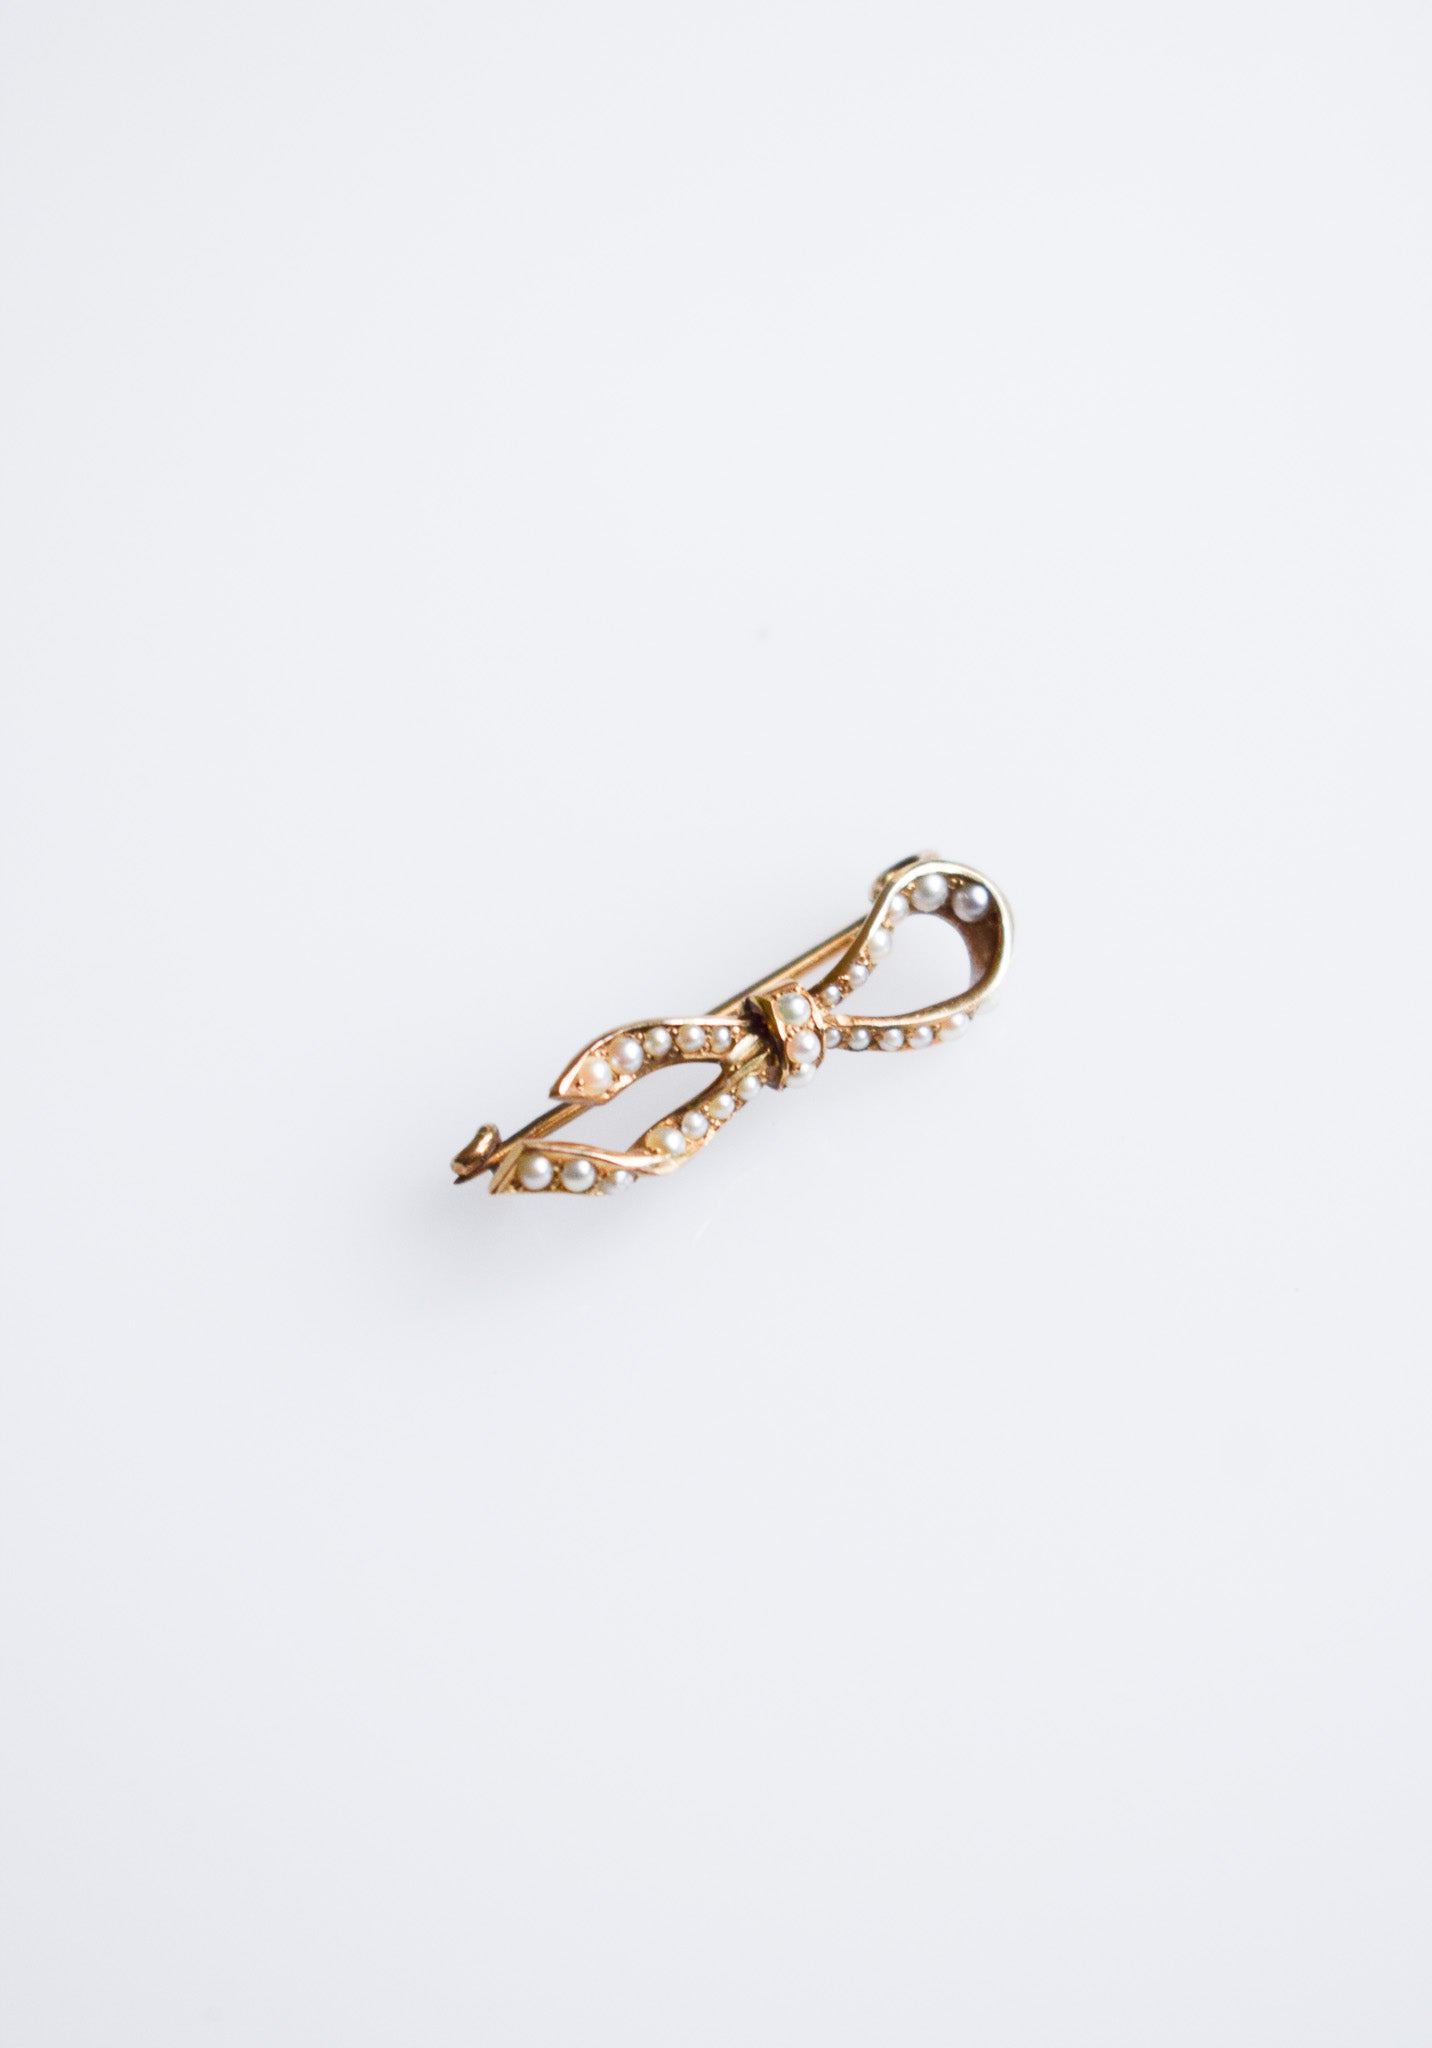 Petite Antique Gold and Seed Pearl Remembrance Ribbon Pin